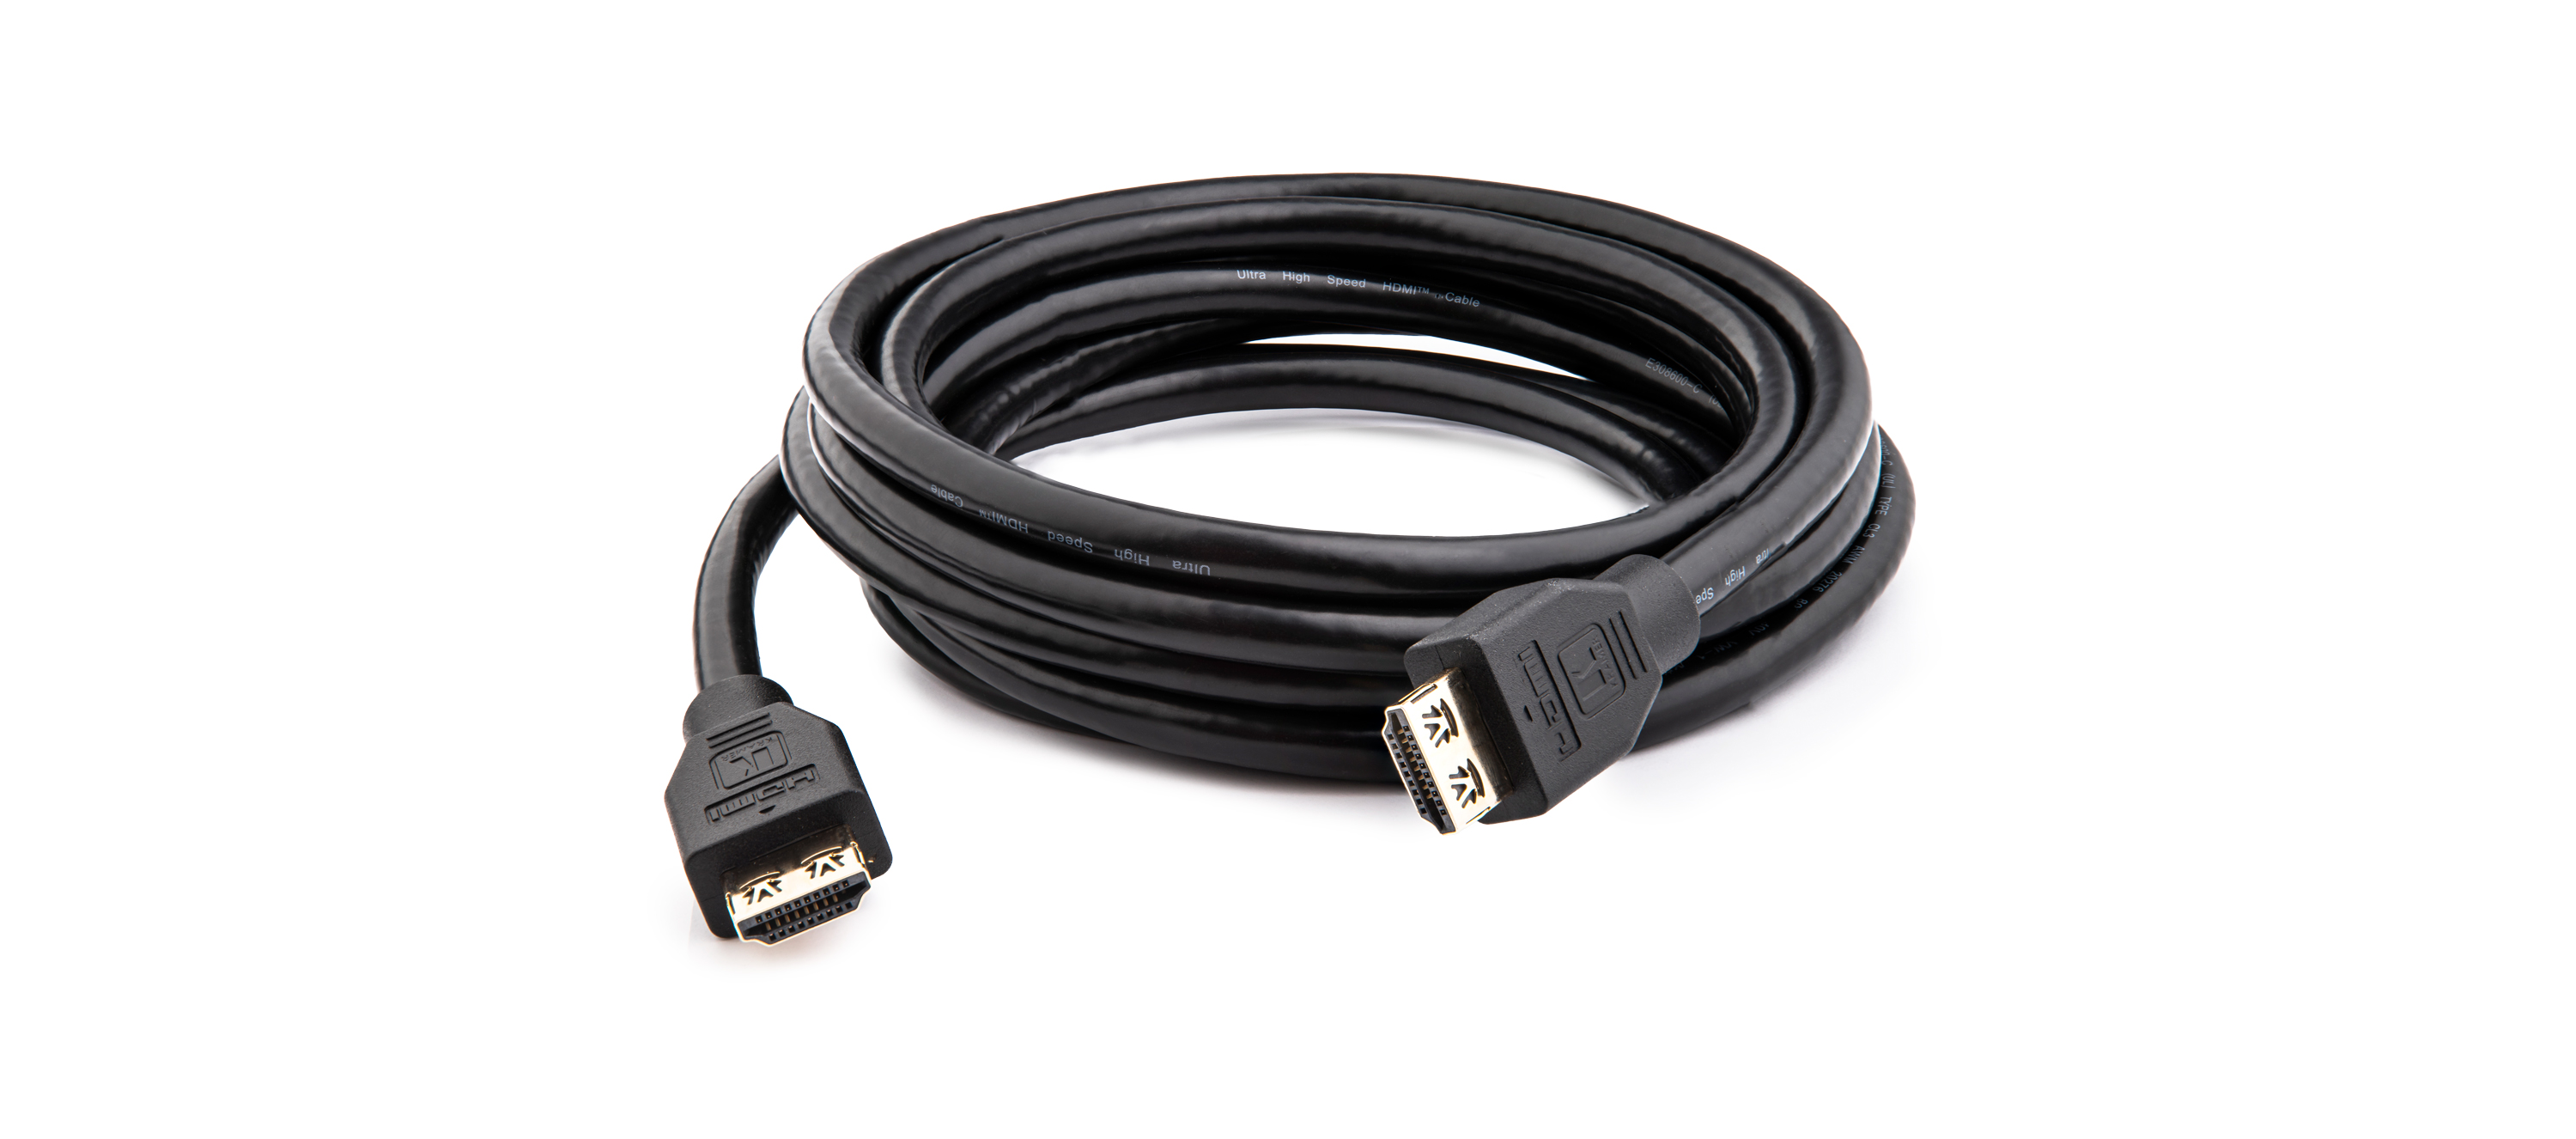 C-HMU-10 Ultra High–Speed HDMI Cable with Ethernet - 10'